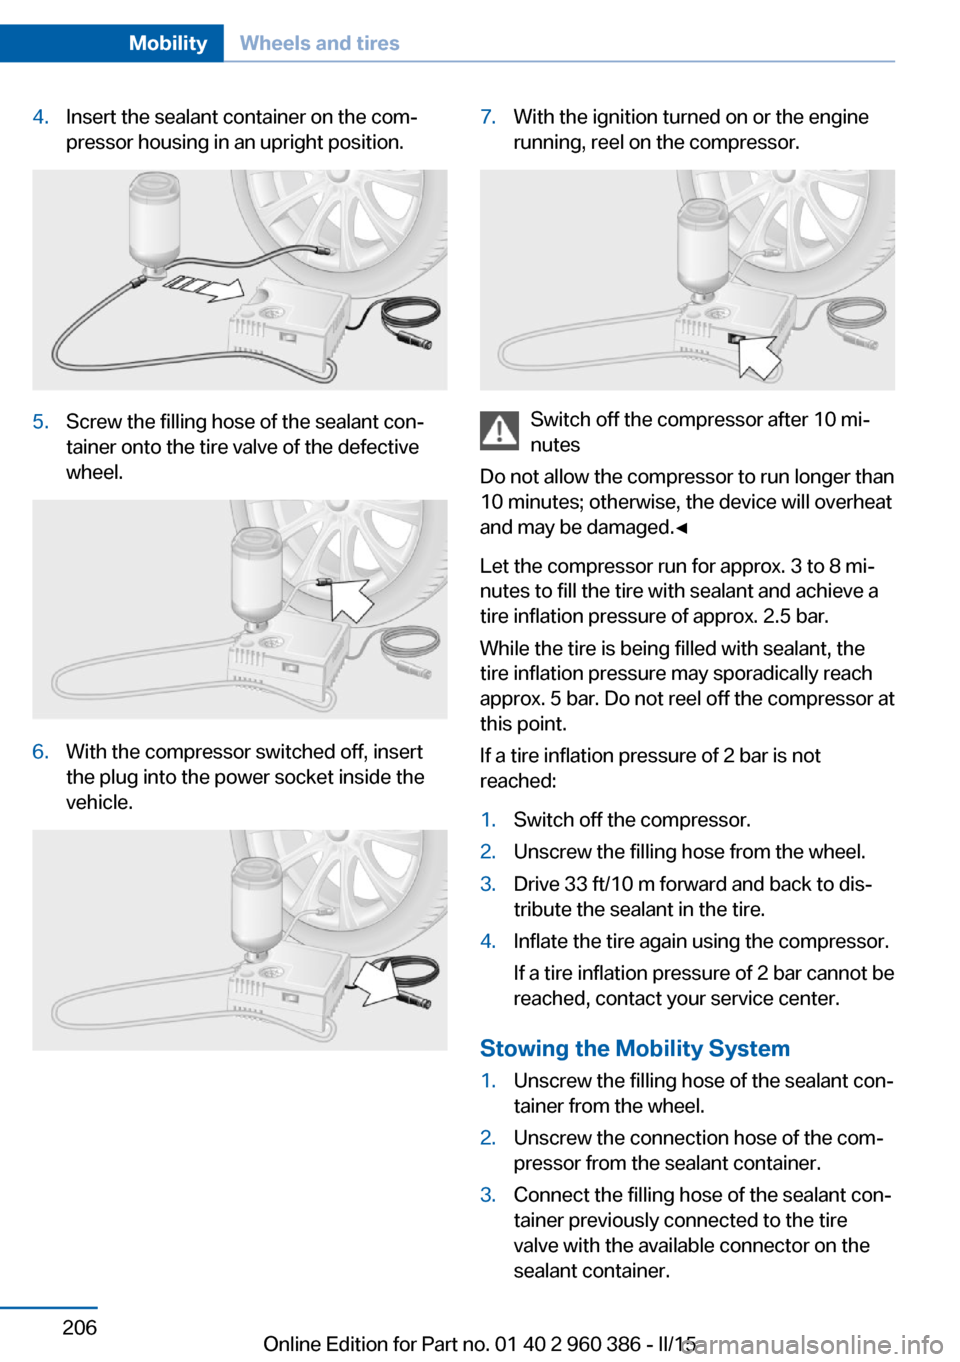 BMW X3 2015 F25 Owners Guide 4.Insert the sealant container on the com‐
pressor housing in an upright position.5.Screw the filling hose of the sealant con‐
tainer onto the tire valve of the defective
wheel.6.With the compress